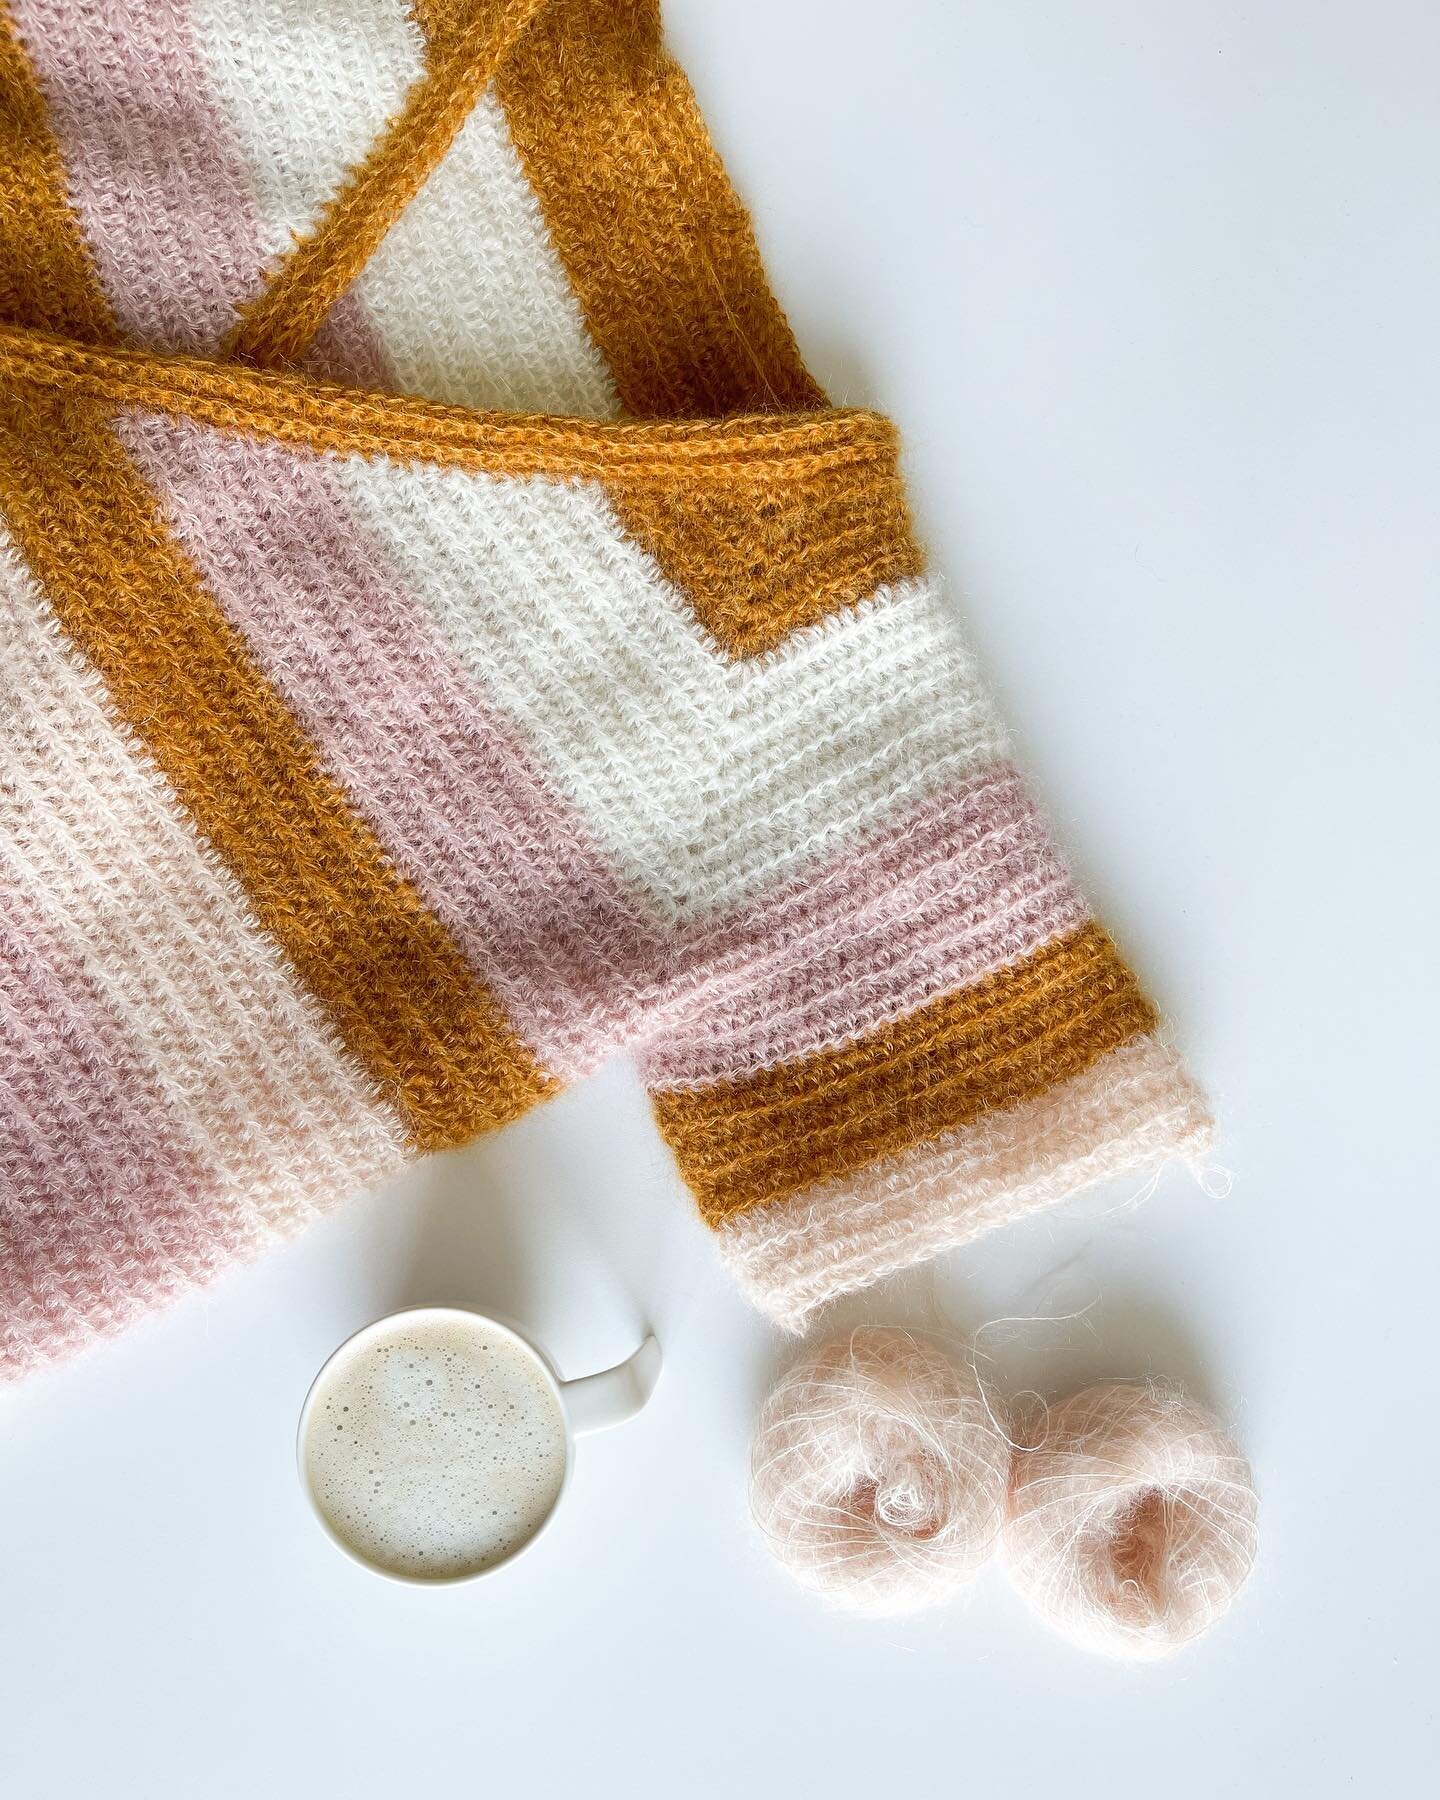 Making progress on my#cherryblossomwrapcardigan in mohair. Currently on sleeve island enjoying the process. This crochet cardigan is so soft! ⁣
⁣
⁣
⁣
Crochet Pattern: Cherry Blossom Wrap Cardigan mohair version (available through the link on my profi